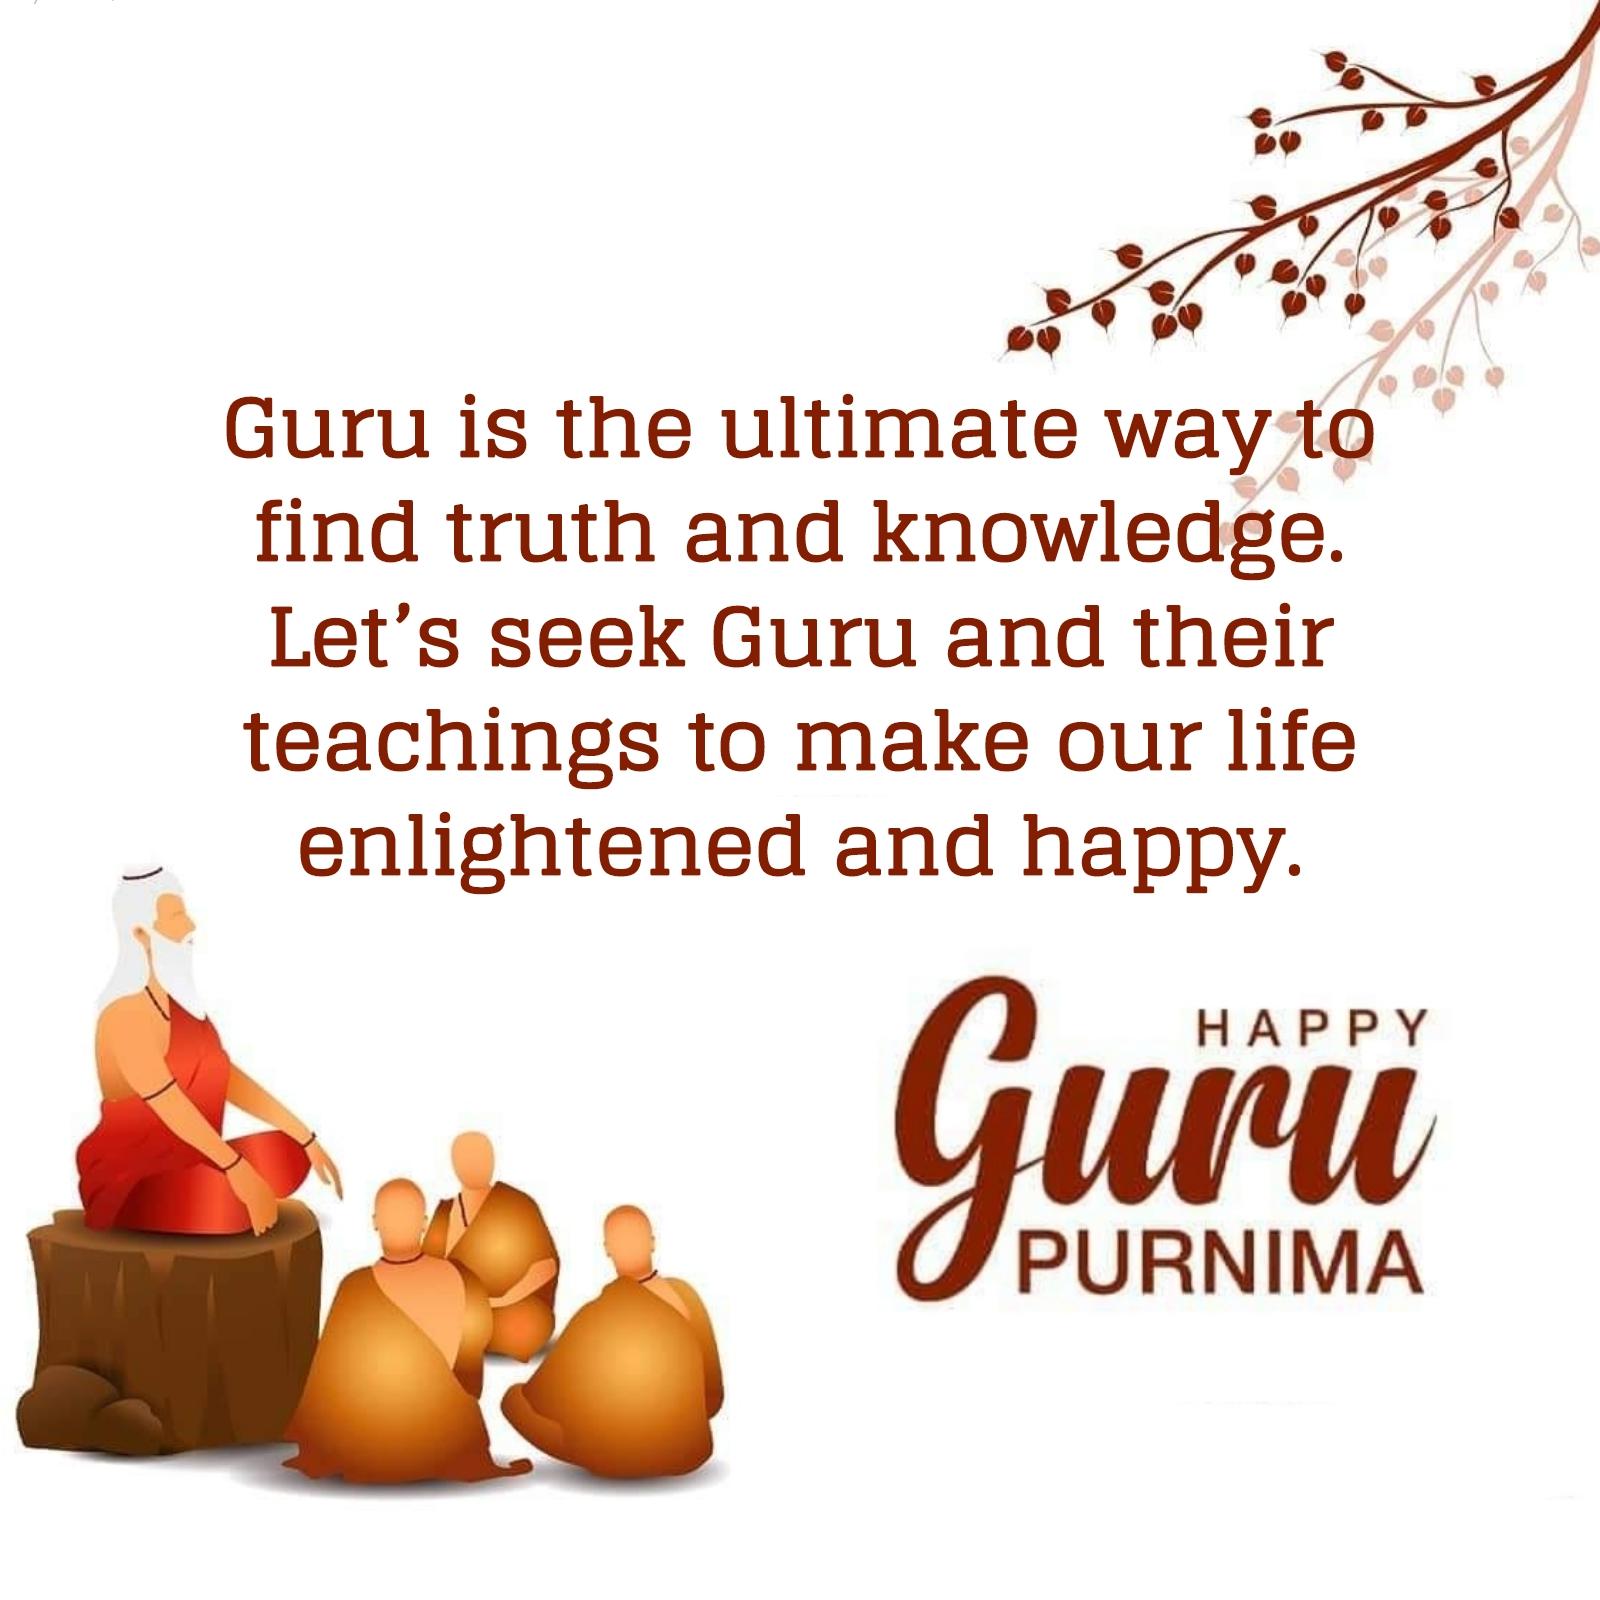 Guru is the ultimate way to find truth and knowledge